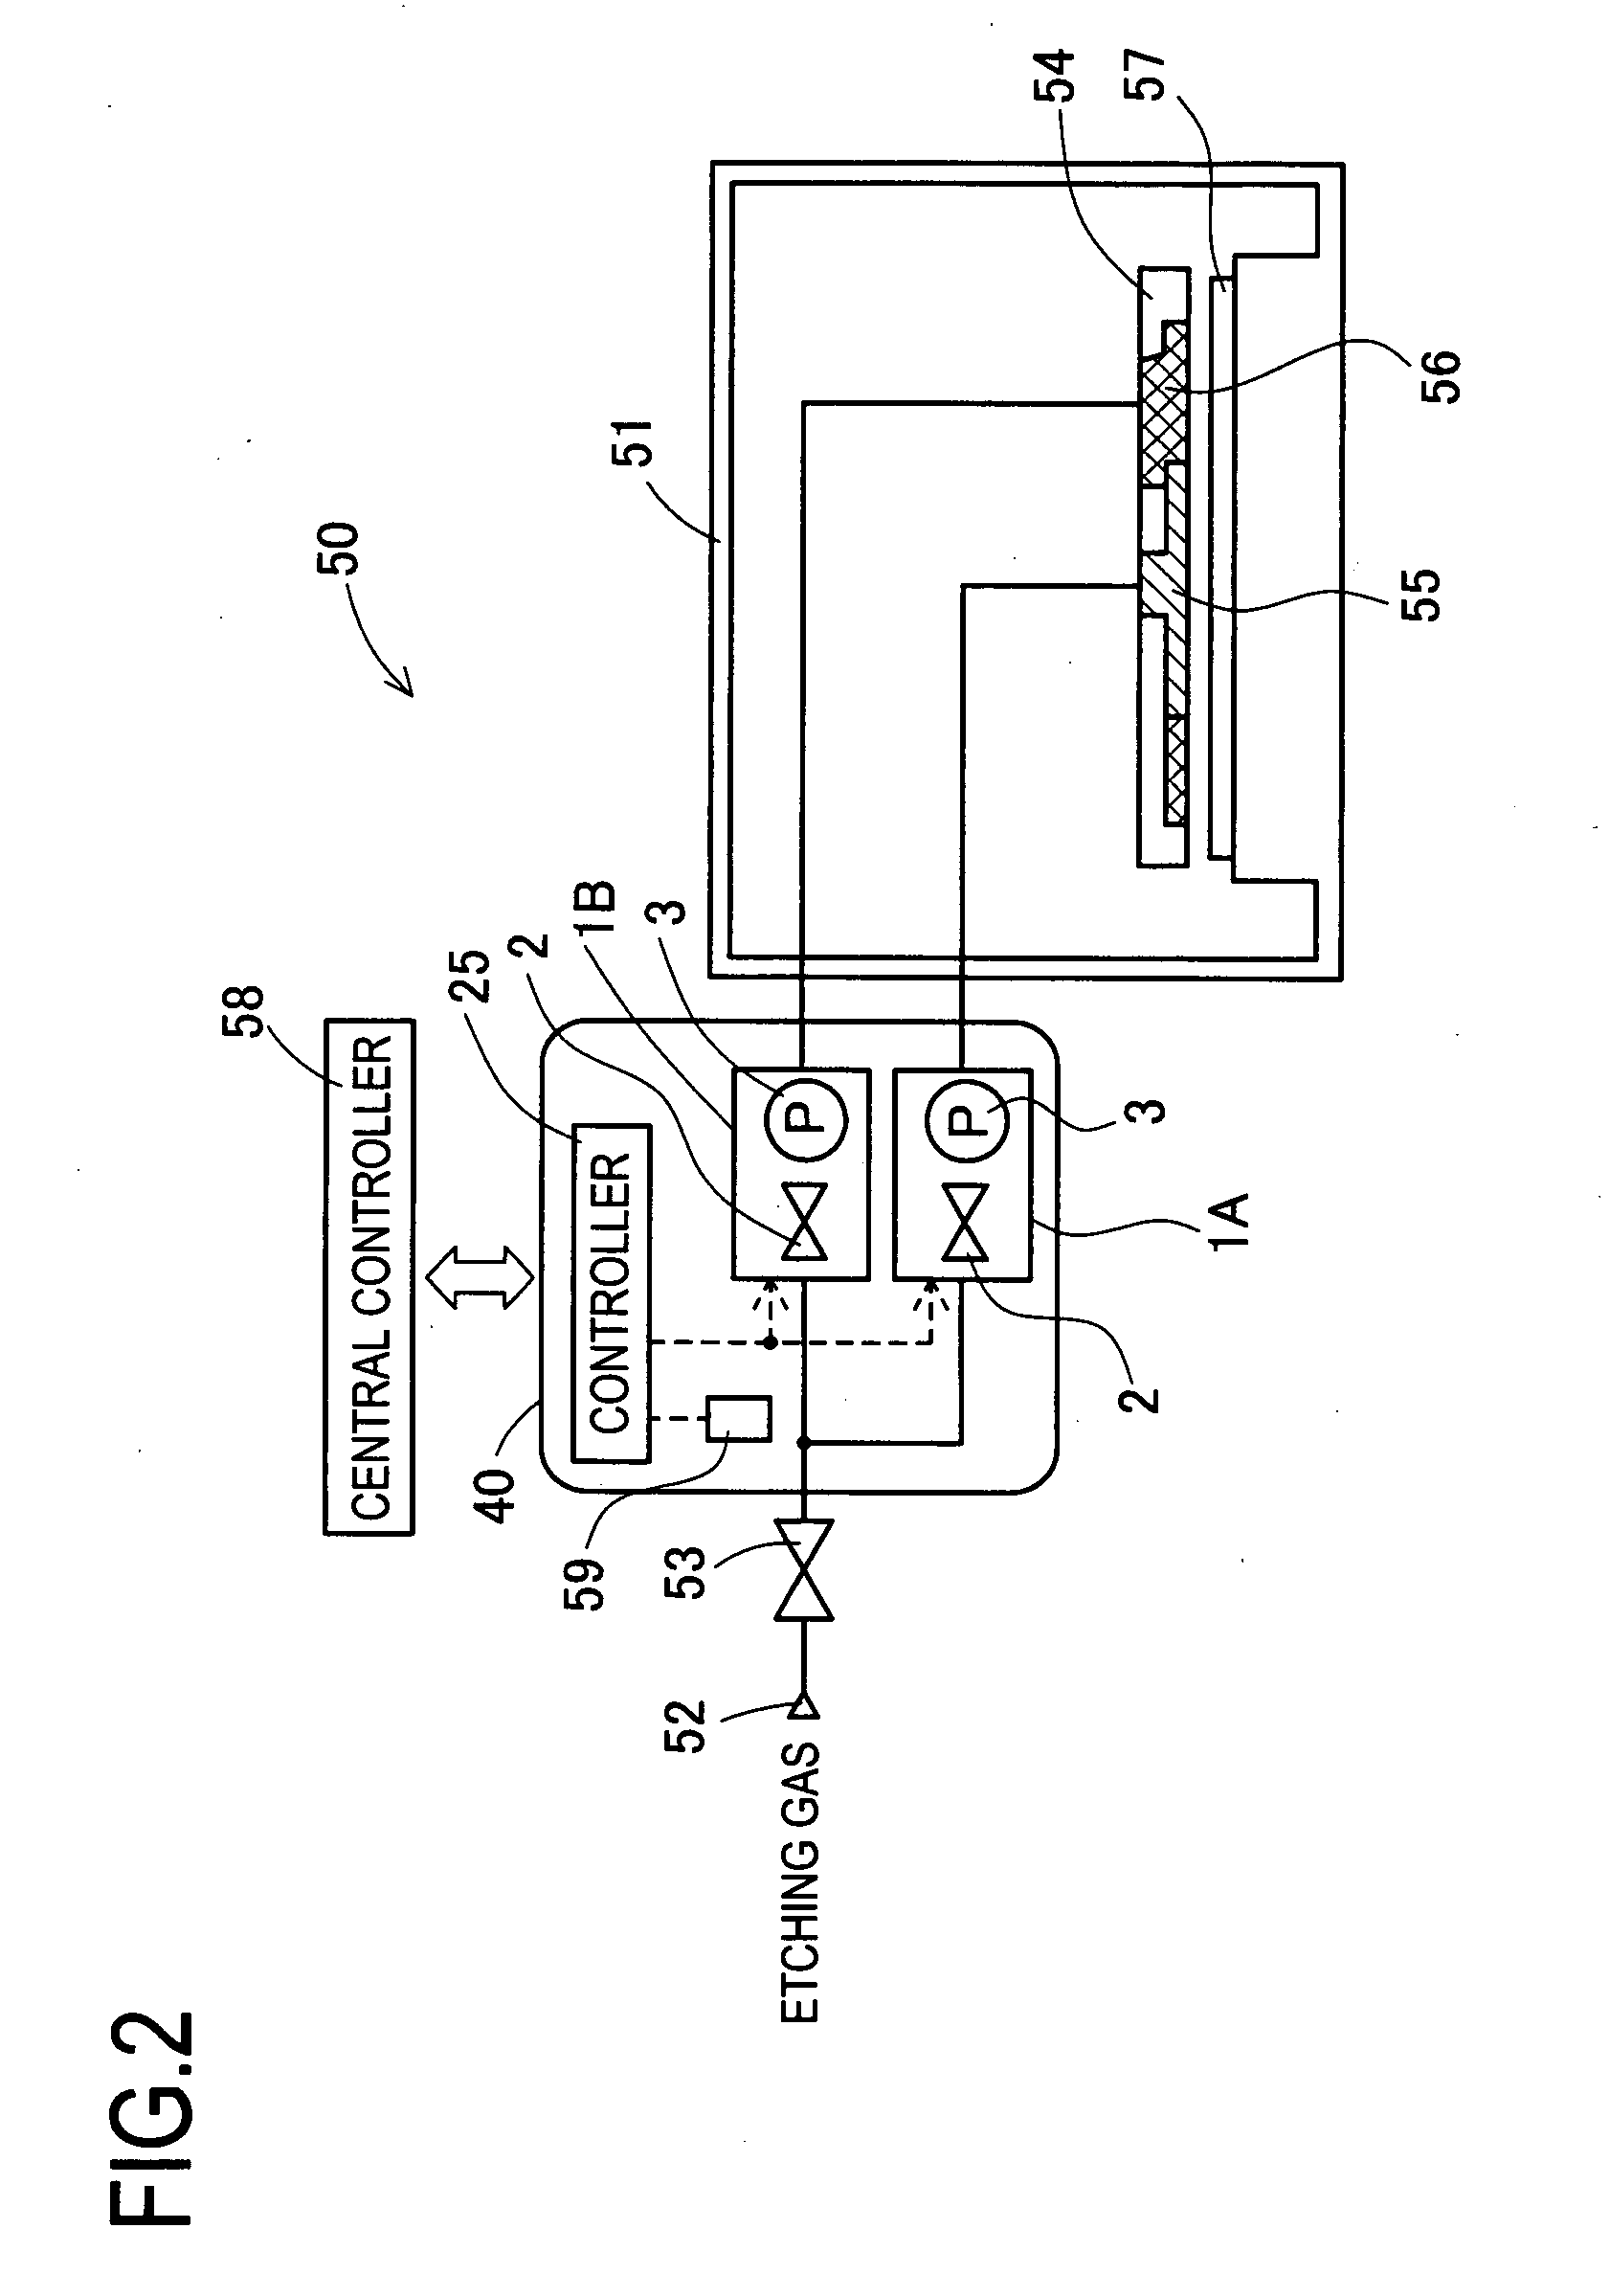 Relative pressure control system and relative flow control system